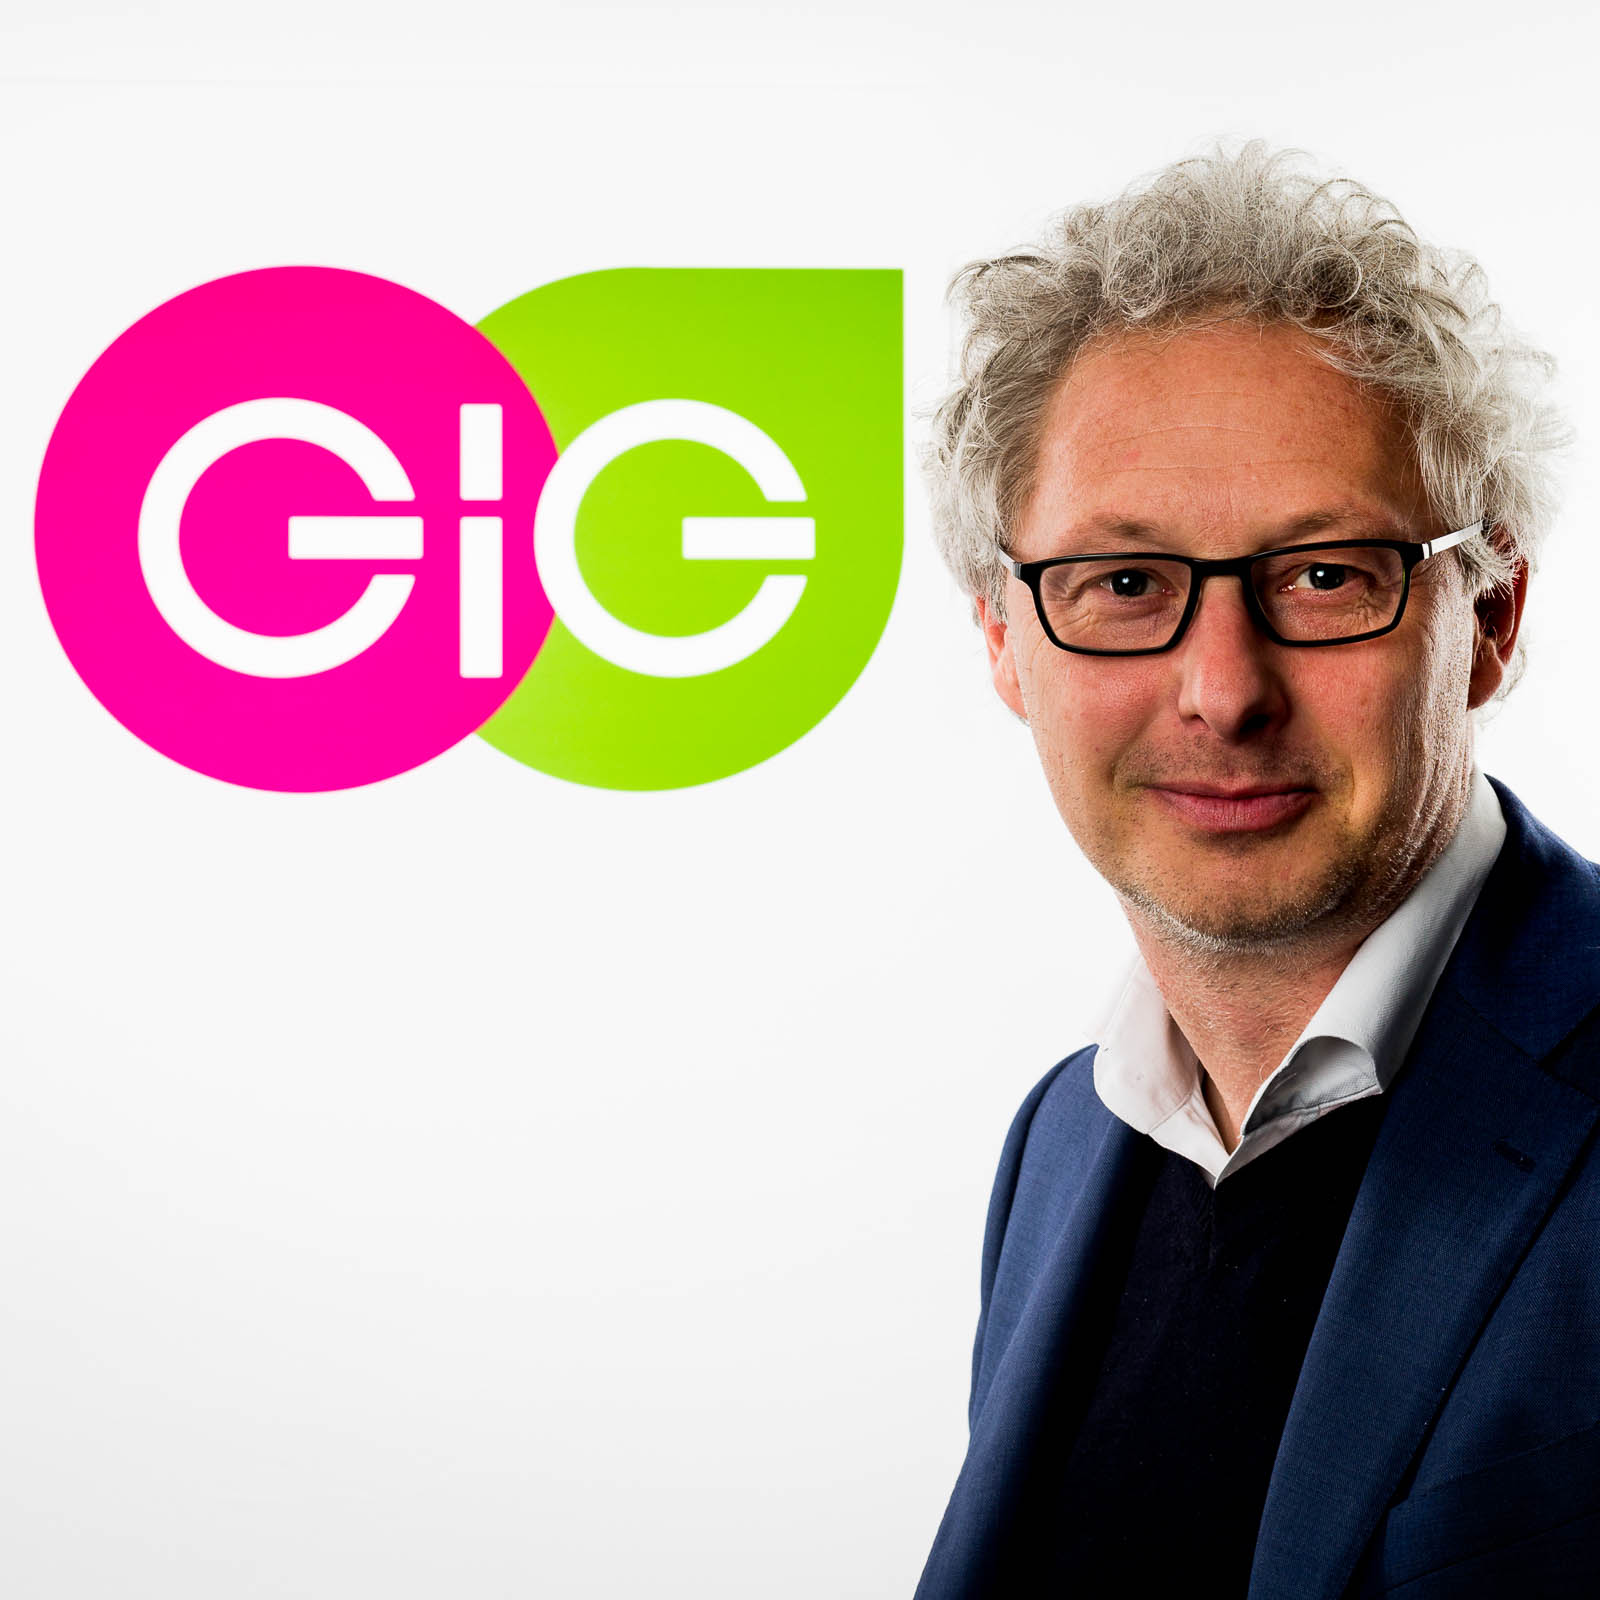 Willem Hendrickx, CEO of GIG Technology.